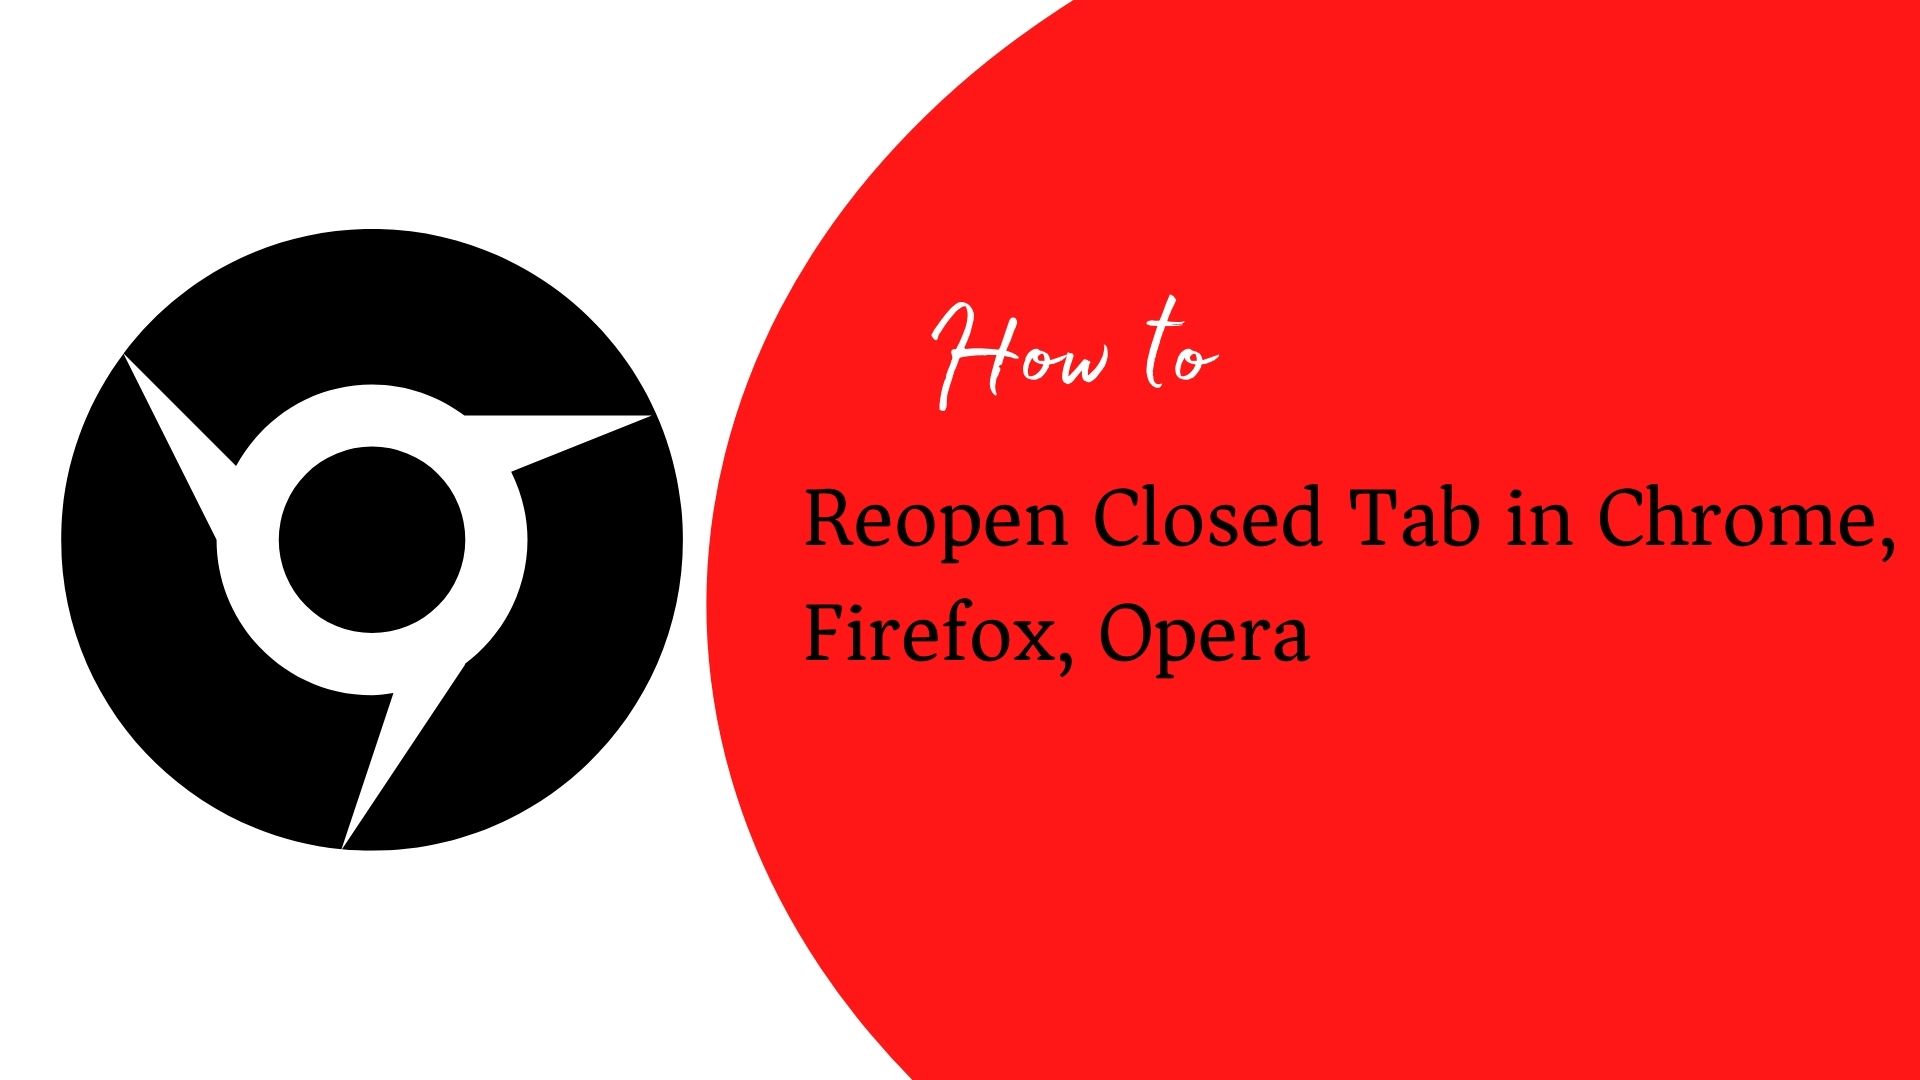 How to Reopen Closed Tab in Chrome, Firefox, Opera